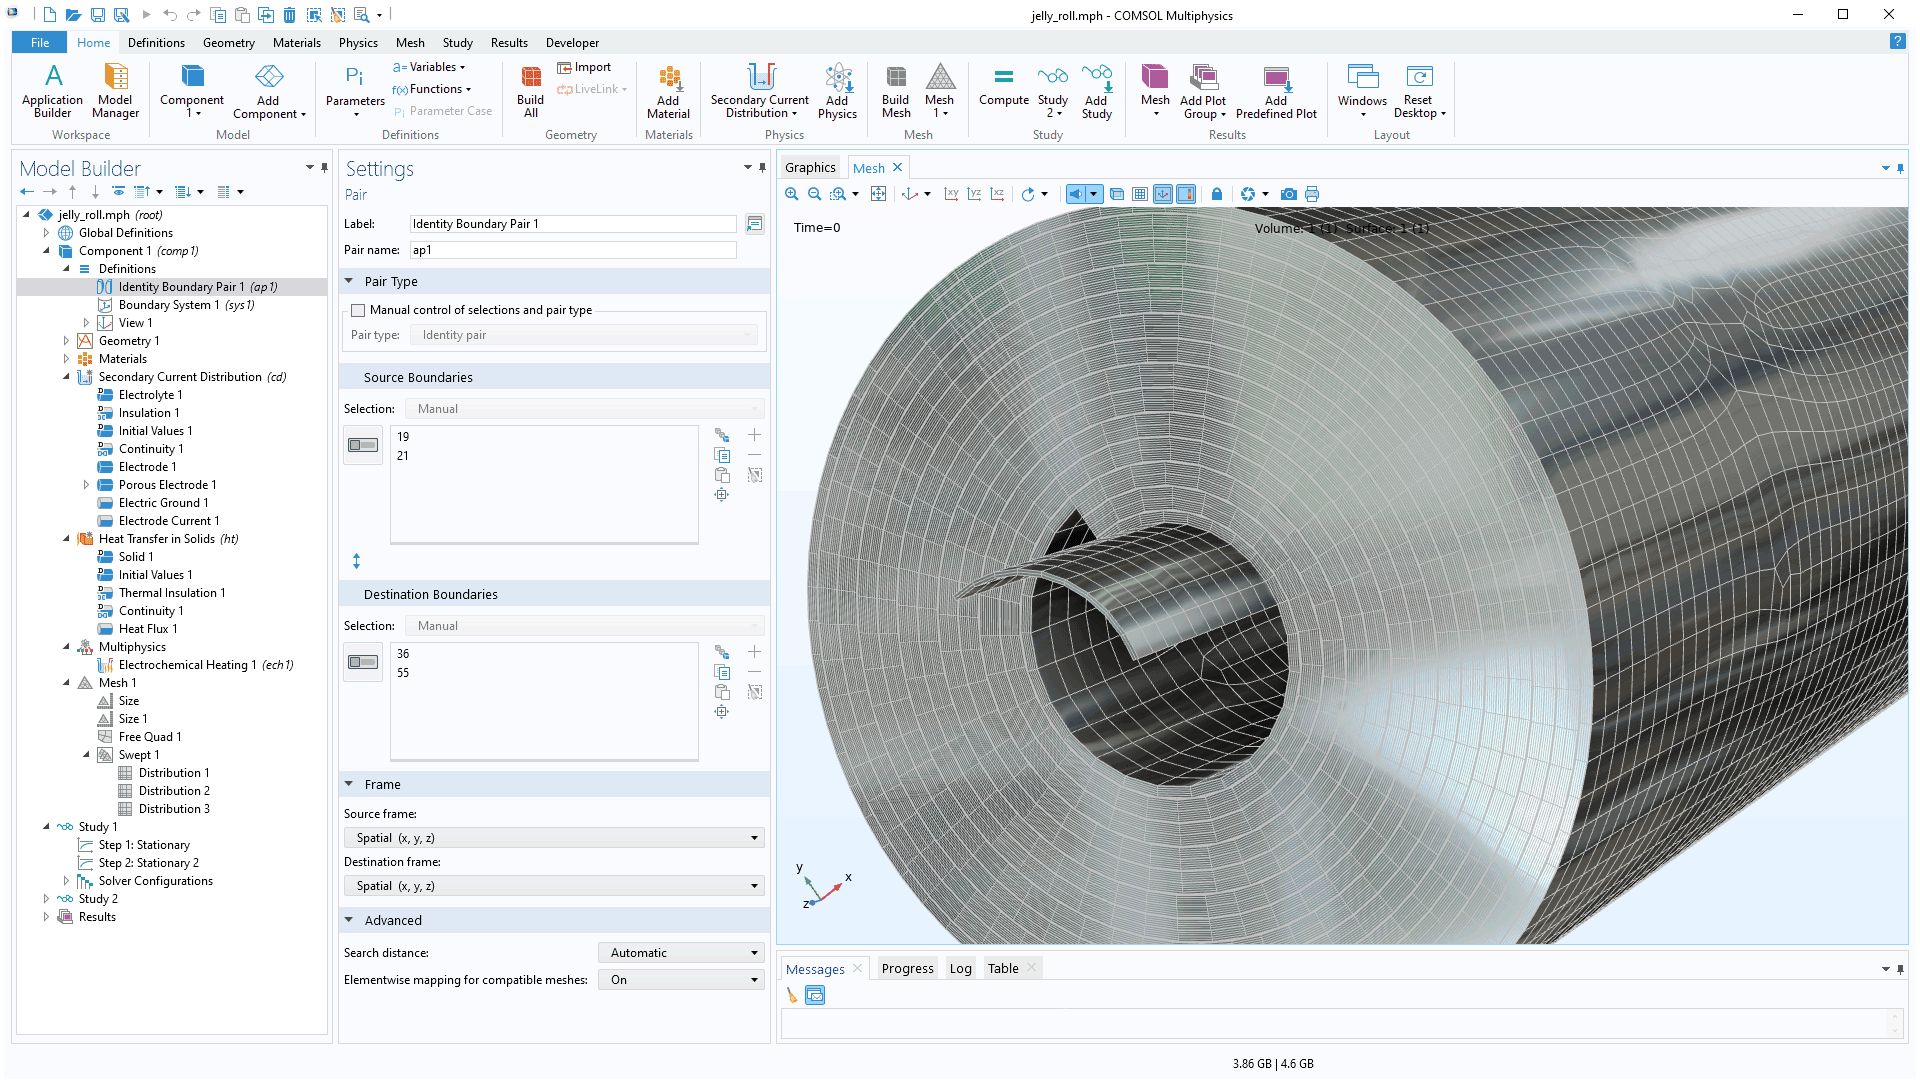 The COMSOL Multiphysics UI showing the Model Builder with the Identity Boundary Pair node highlighted, the corresponding Settings window, and a jelly roll model in the Graphics window.